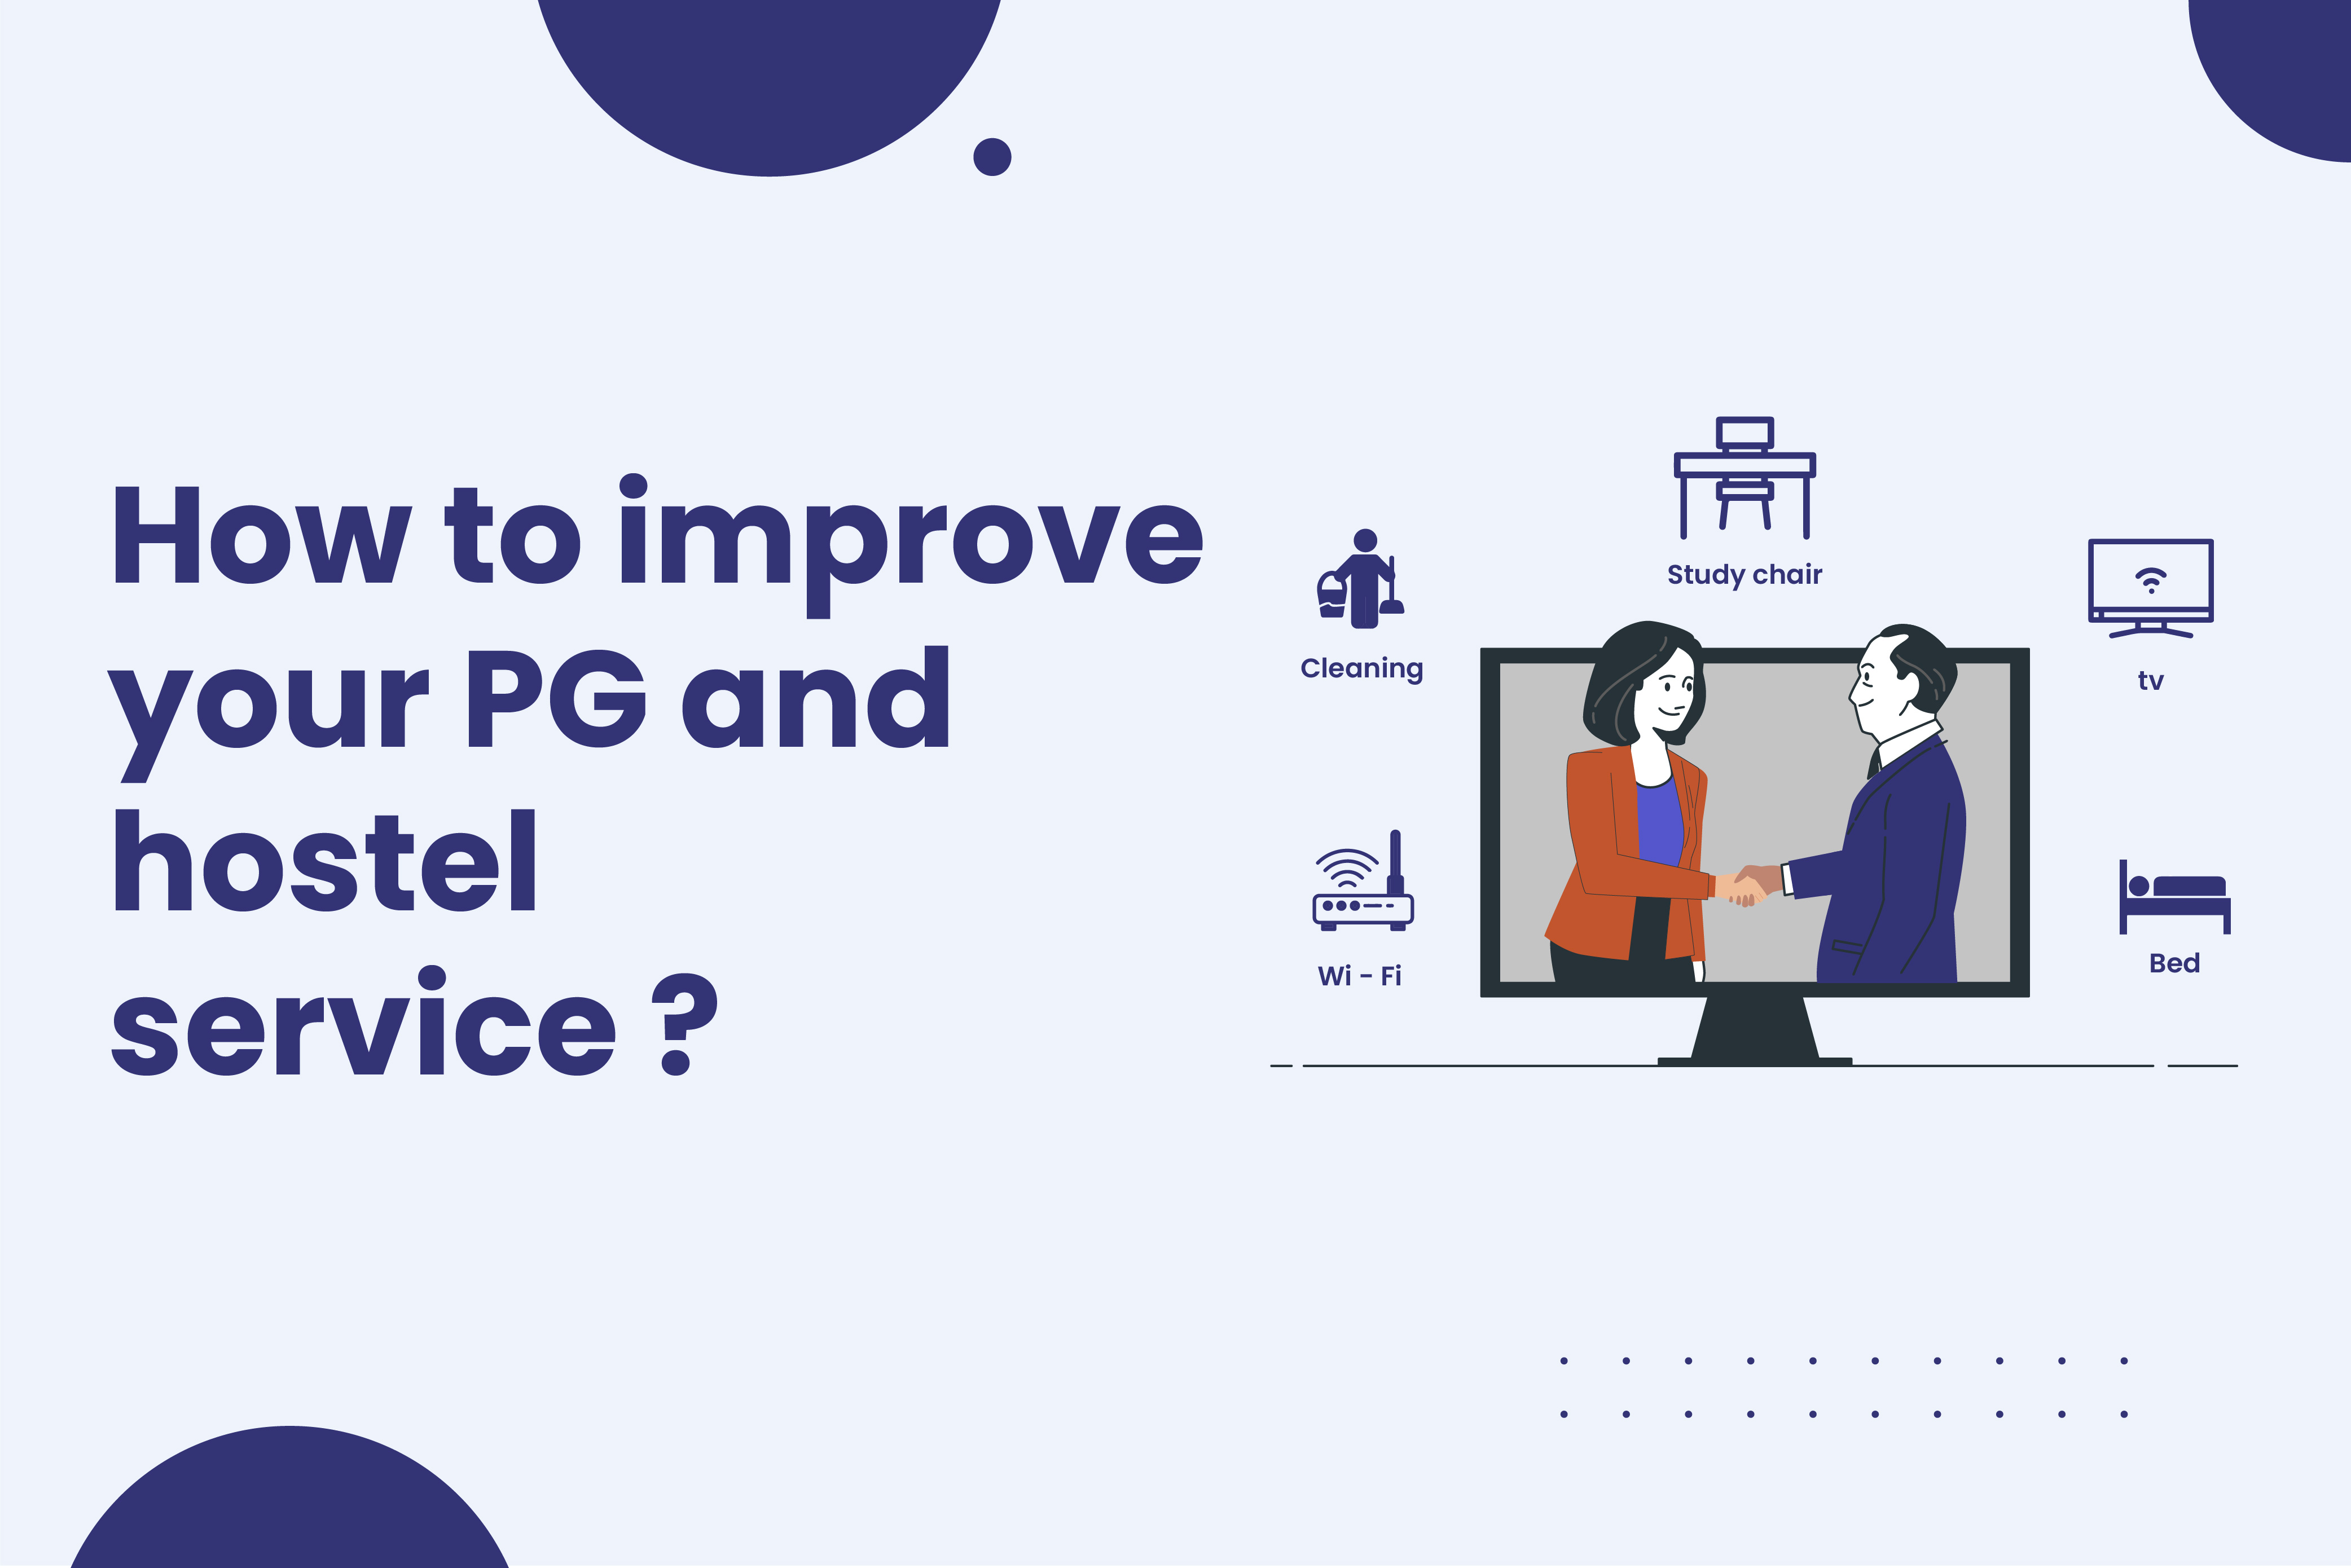 How to improve your PG and hostel service ?